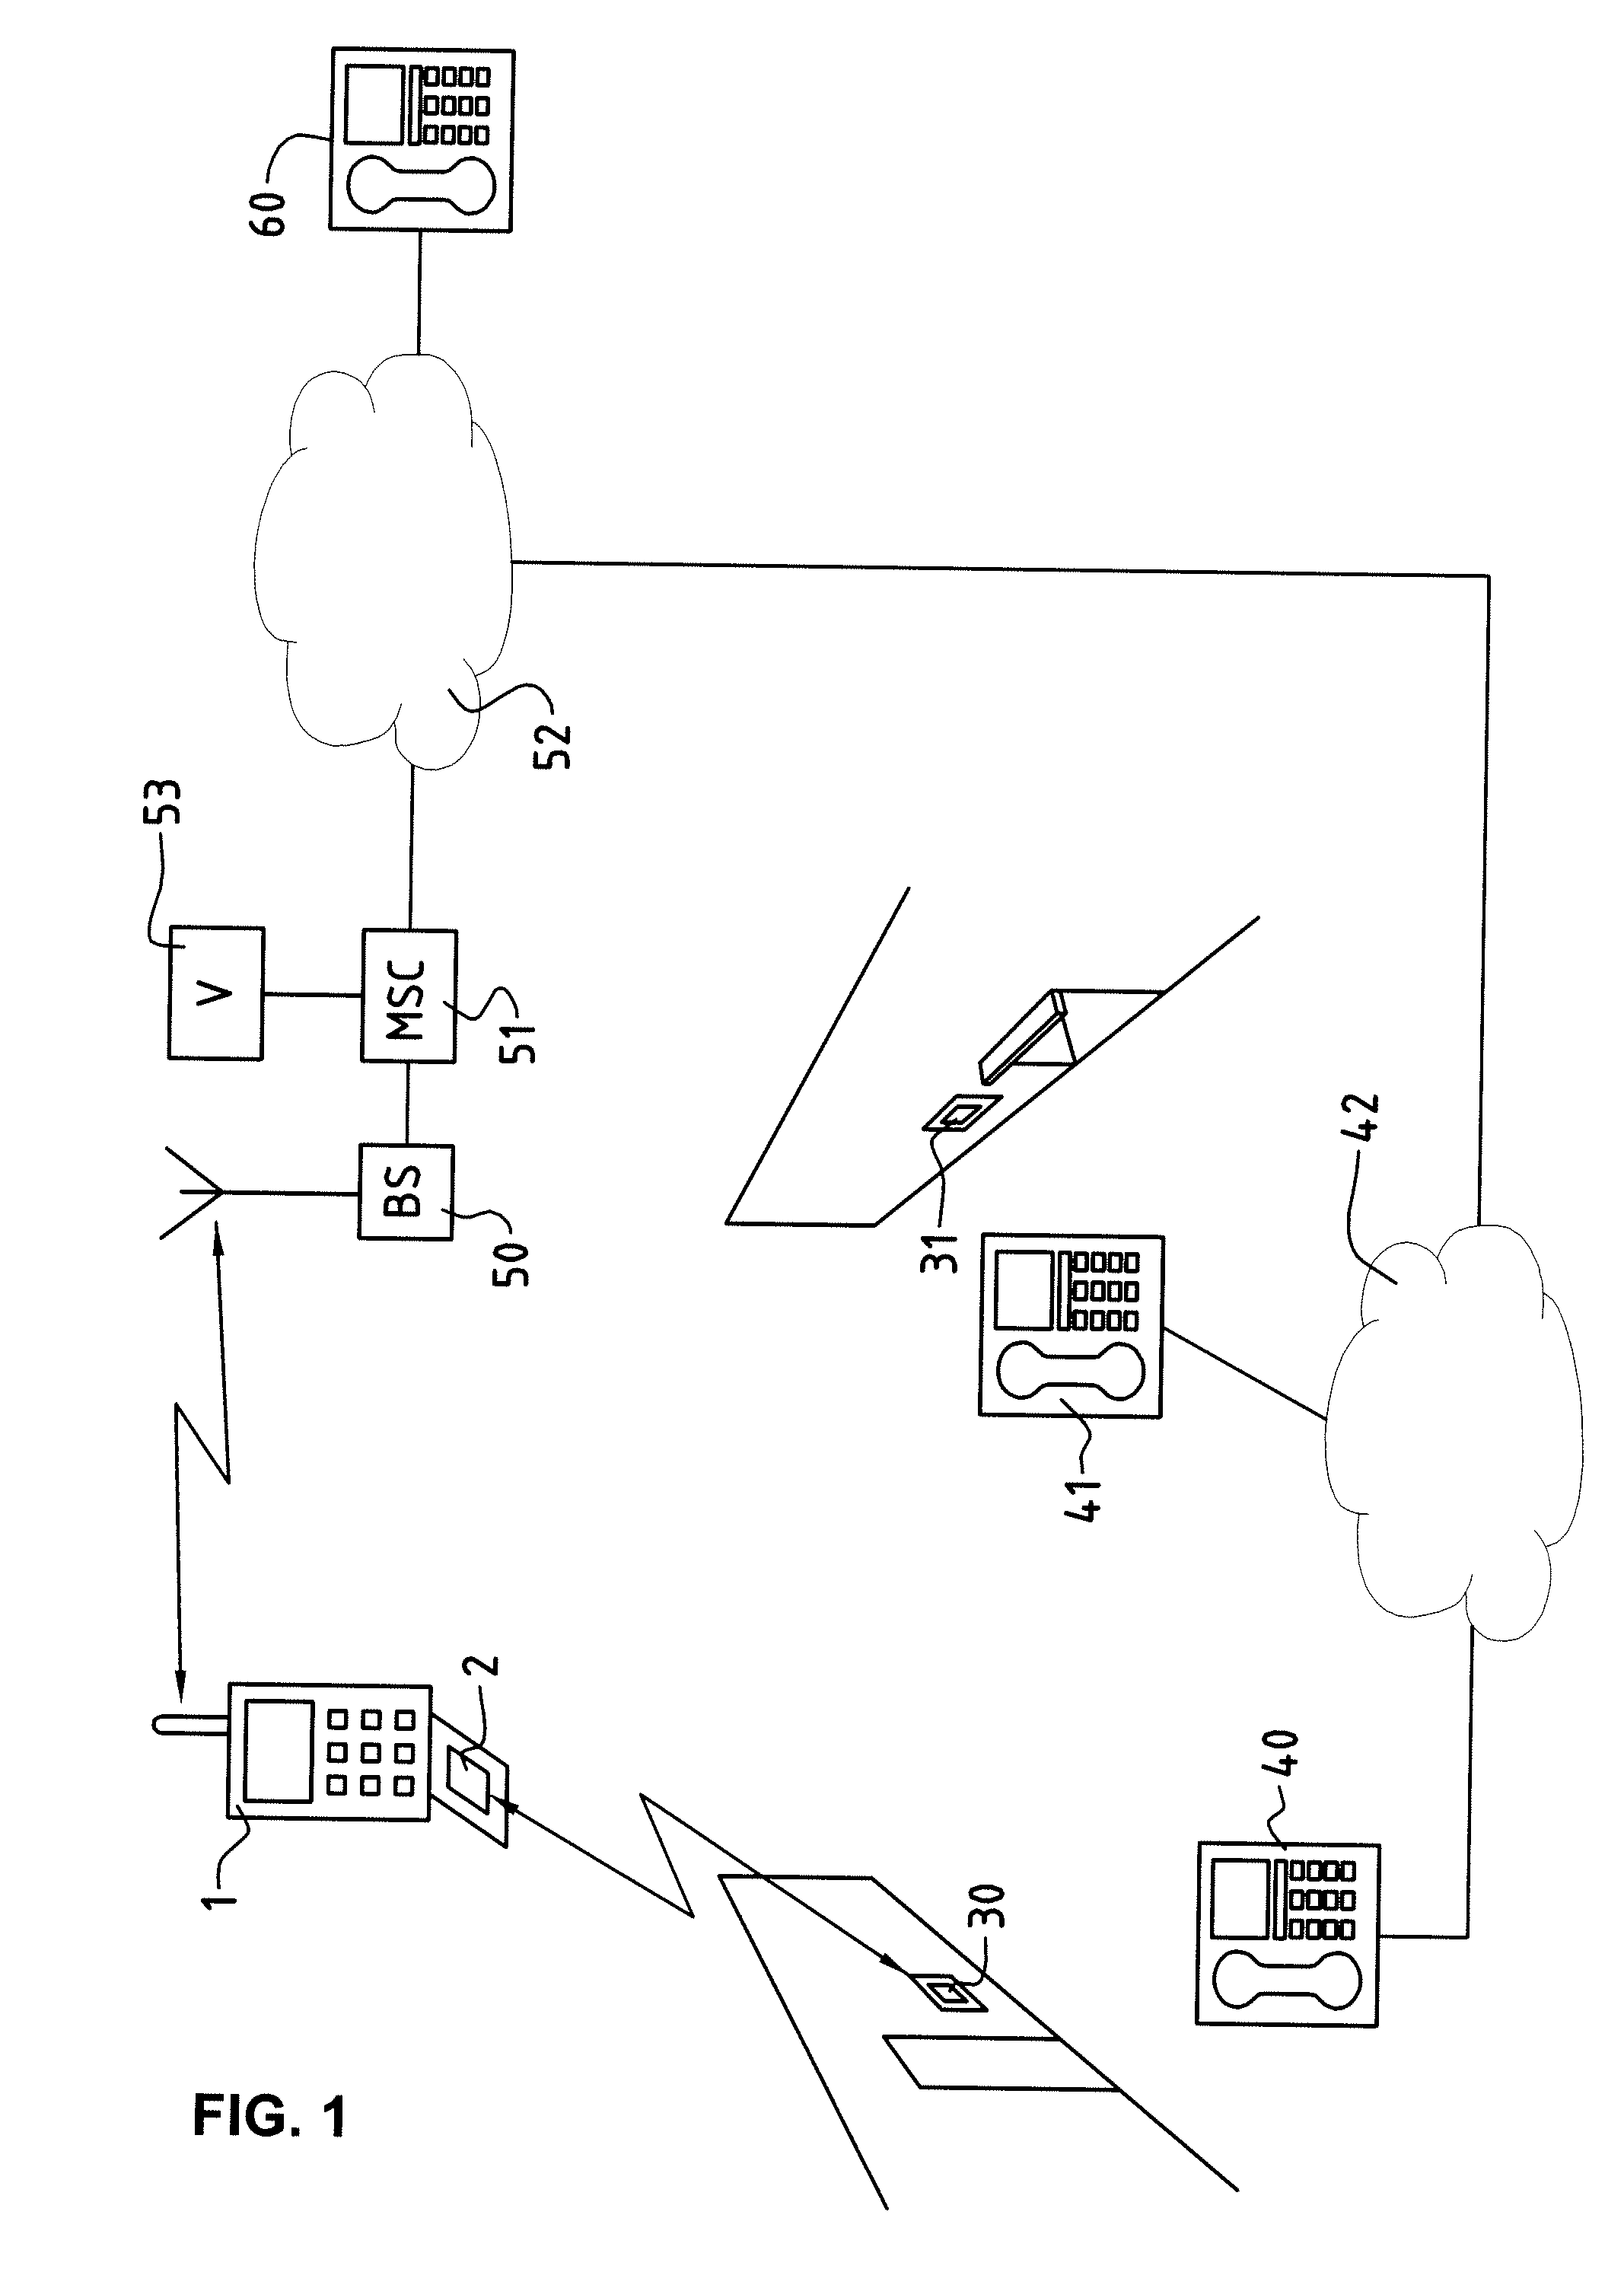 Method and system for location-dependent billing for services